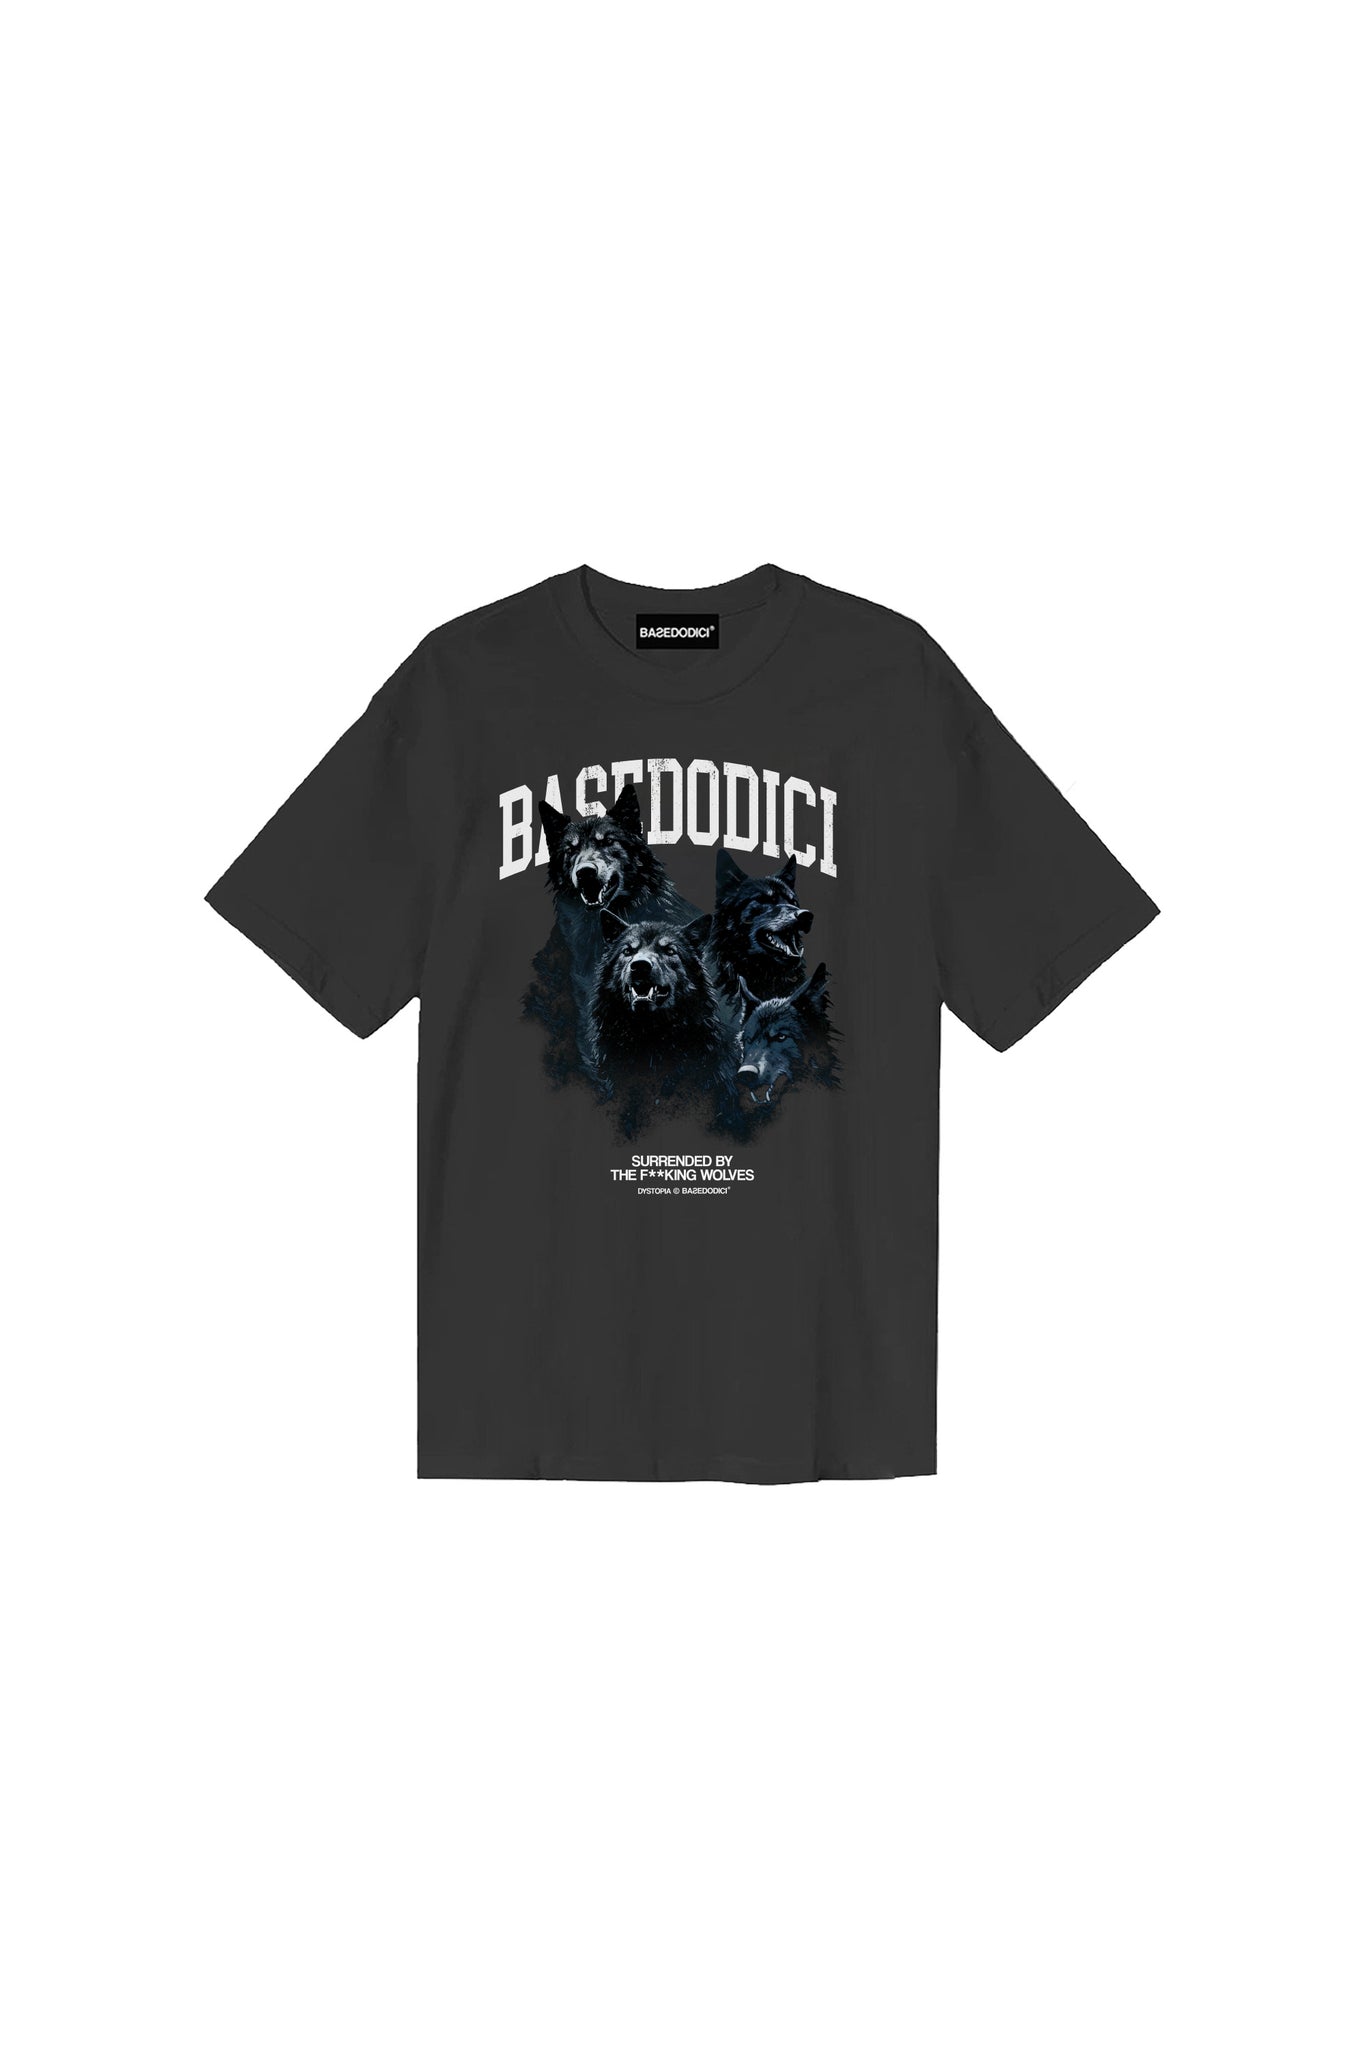 T-Shirt “DYSTOPIA” Wolves Black